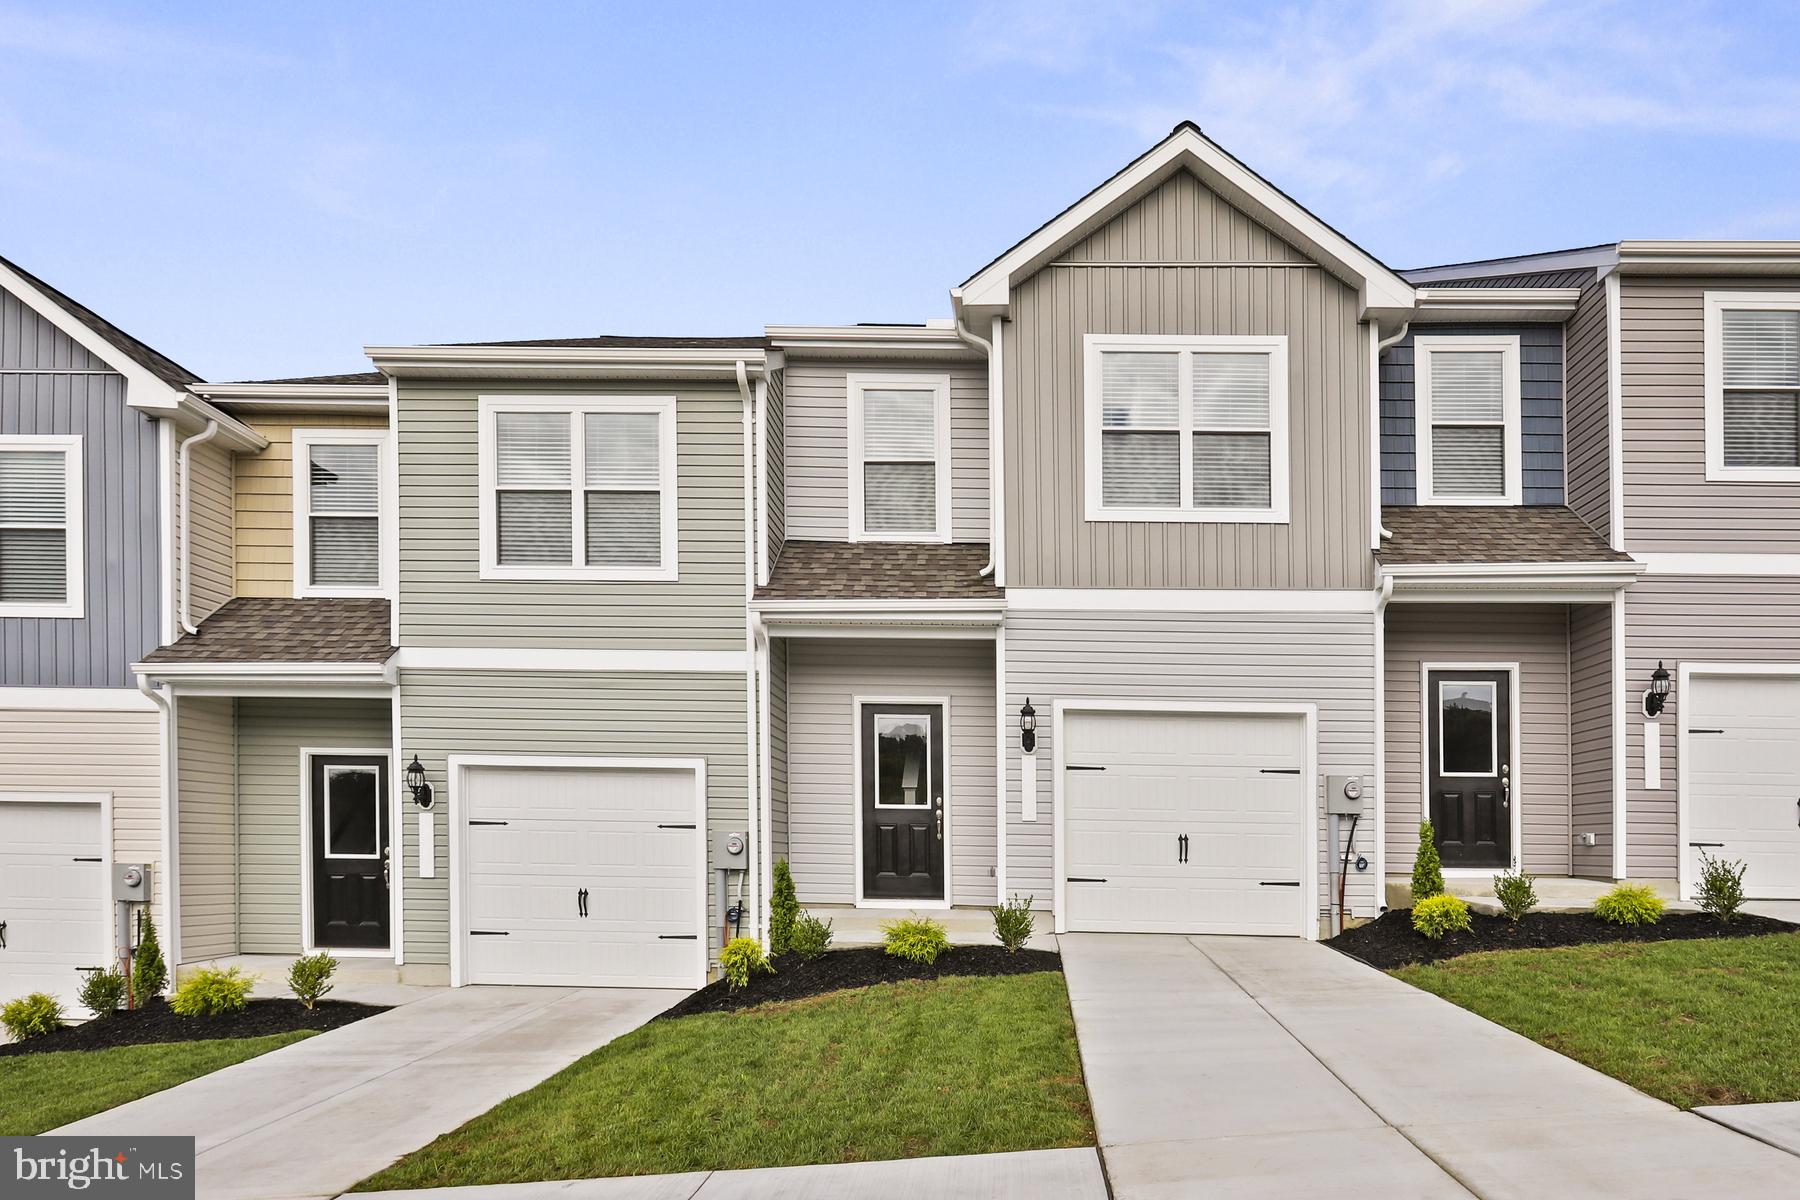 The Robertson is a spacious and modern 3-bedroom, 2.5-bath townhome from LGI Homes at Homeplace at R